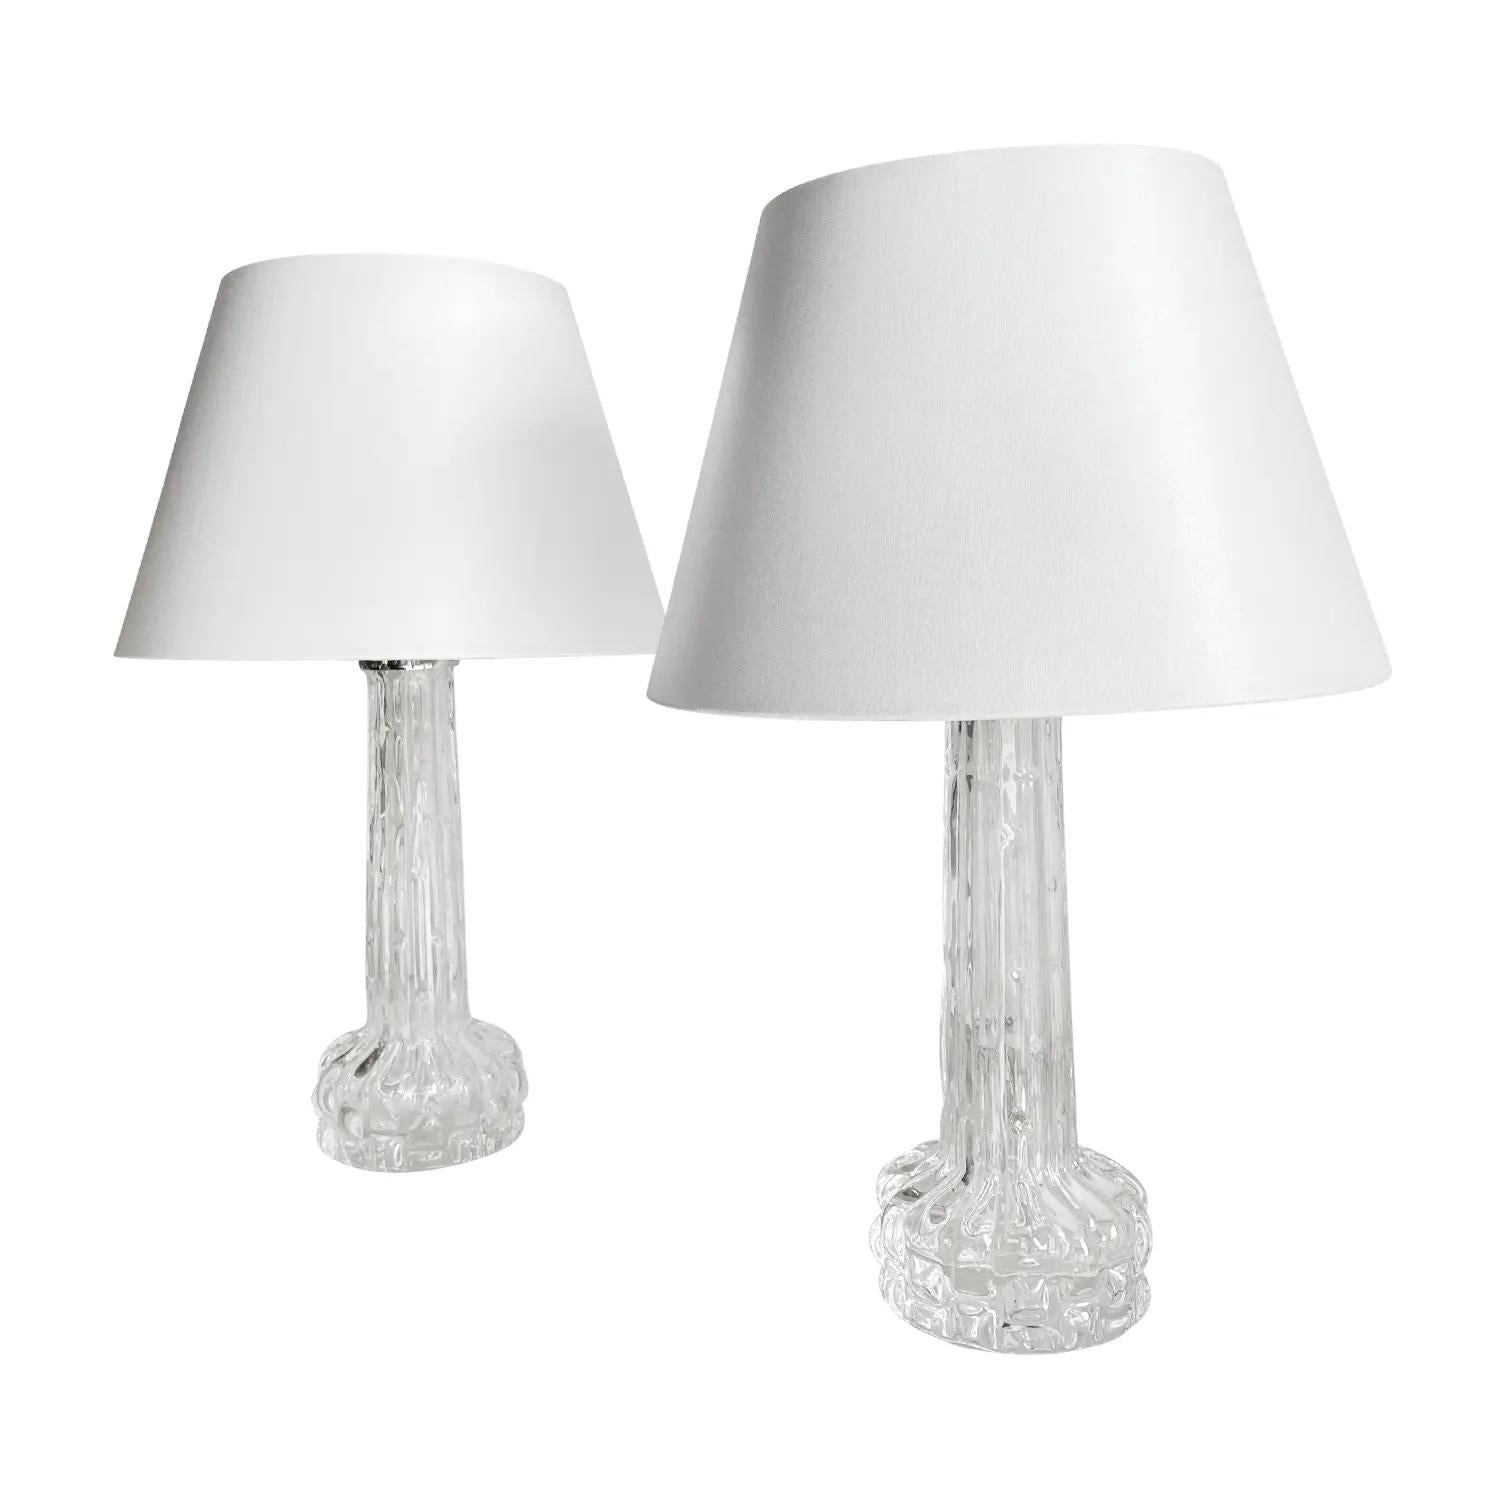 Hand-Crafted 20th Century Swedish Pair of Orrefors Glass Table, Desk Lights by Carl Fagerlund